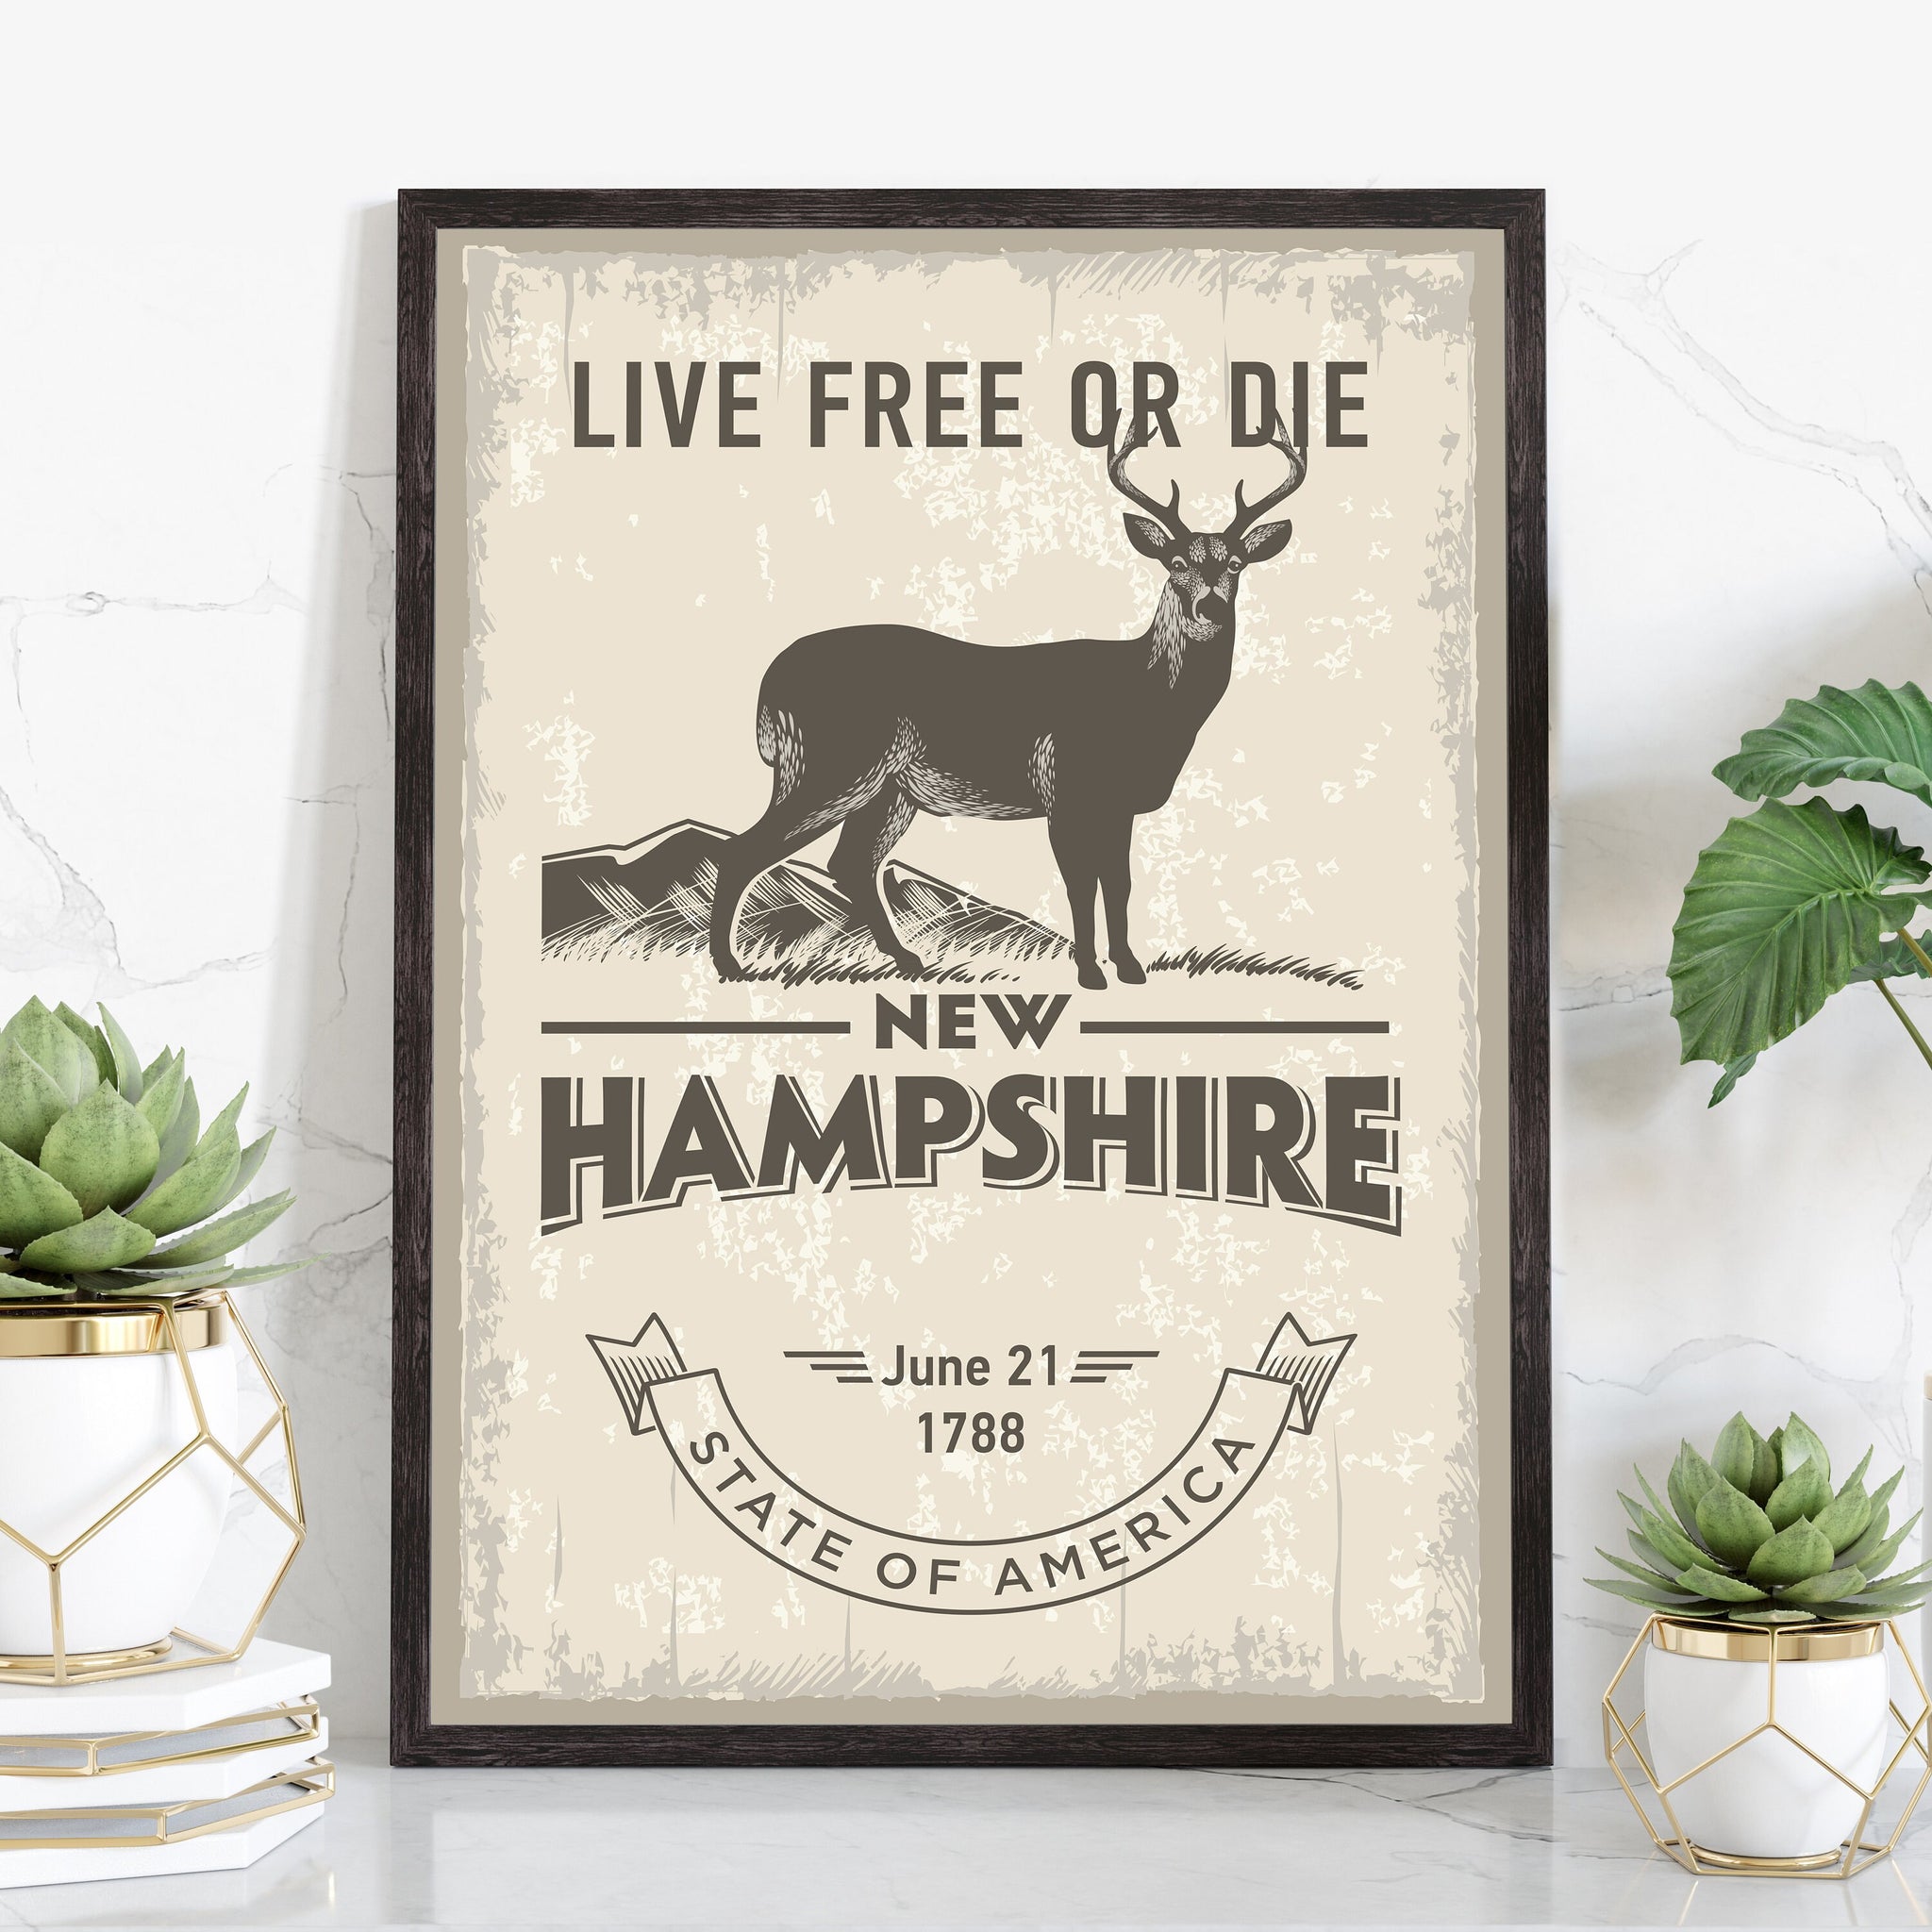 New Hampshire State Symbol Poster, New Hampshire State Poster Print, State Emblem Poster, Retro Travel State Poster, Home - Office Wall Art